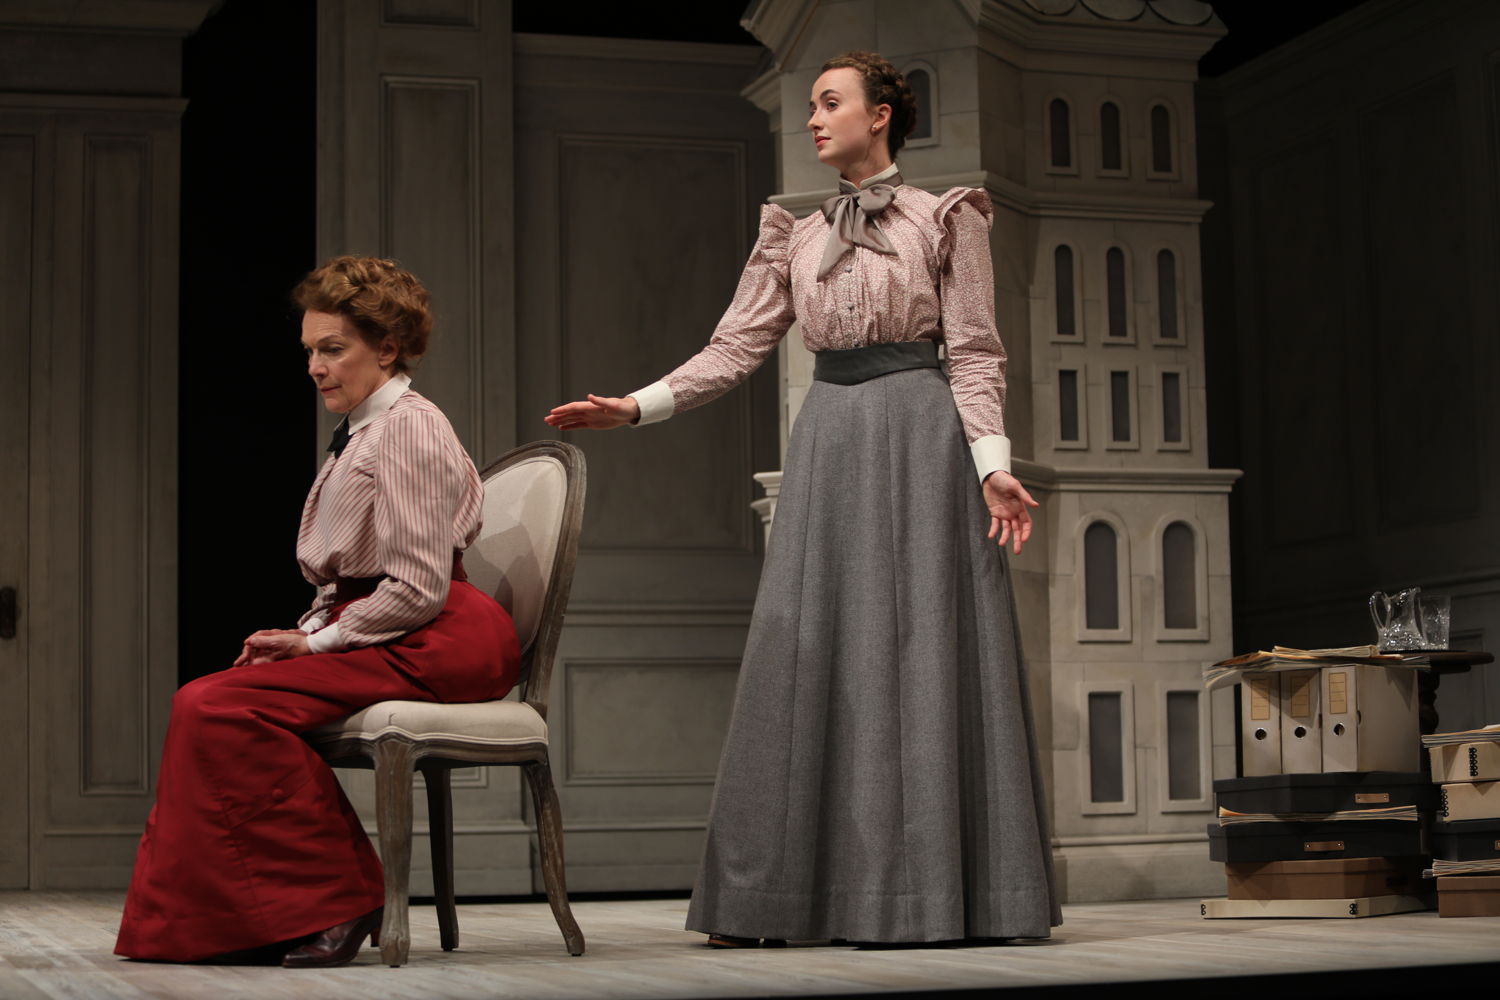 Martha Burns (Nora) and Alice Snaden (Emmy) in A Doll’s House, Part 2 by Lucas Hnath / Photos by Tim Matheson

Canadian Premiere
September 16 – October 14, 2018
<a href="https://www.belfry.bc.ca/a-dolls-house-part-2/" rel="nofollow">www.belfry.bc.ca/a-dolls-house-part-2/</a>

Belfry Theatre, 1291 Gladstone Avenue, Victoria, British Columbia, Canada

Creative Team
Lucas Hnath - Playwright
Michael Shamata - Director
Christina Poddubiuk - Set & Costume Designer
Kevin Fraser - Lighting Designer
Tobin Stokes - Composer & Sound Designer
Jennifer Swan - Stage Manager
Carissa Sams - Assistant Stage Manager
Hilary Britton-Foster - Assistant Lighting Designer